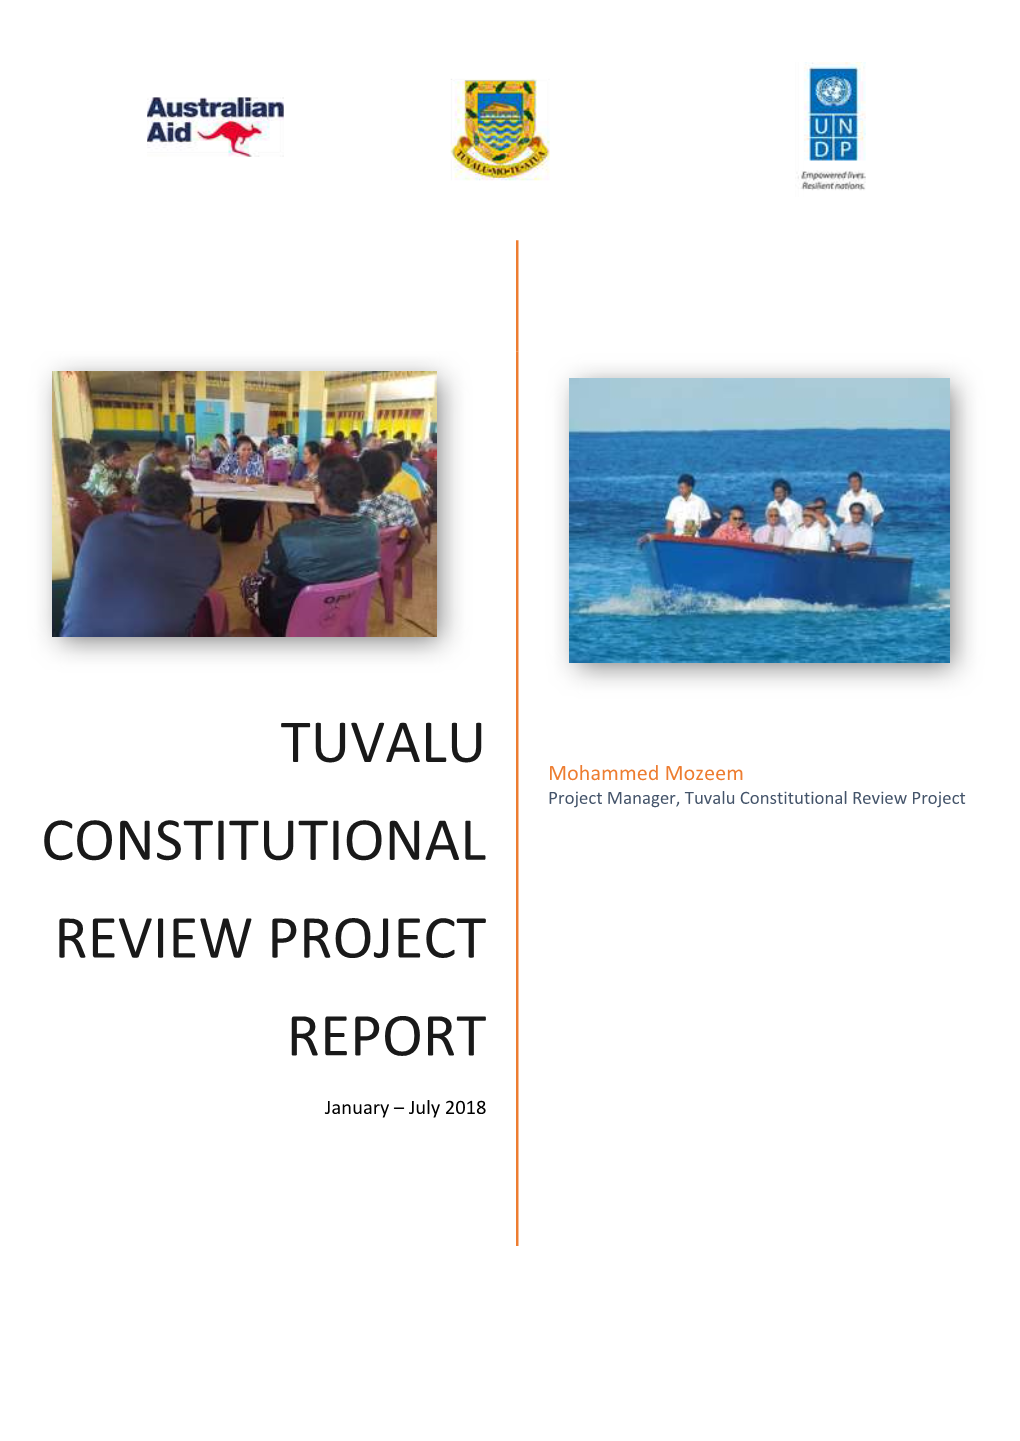 Tuvalu Constitutional Review Project Report